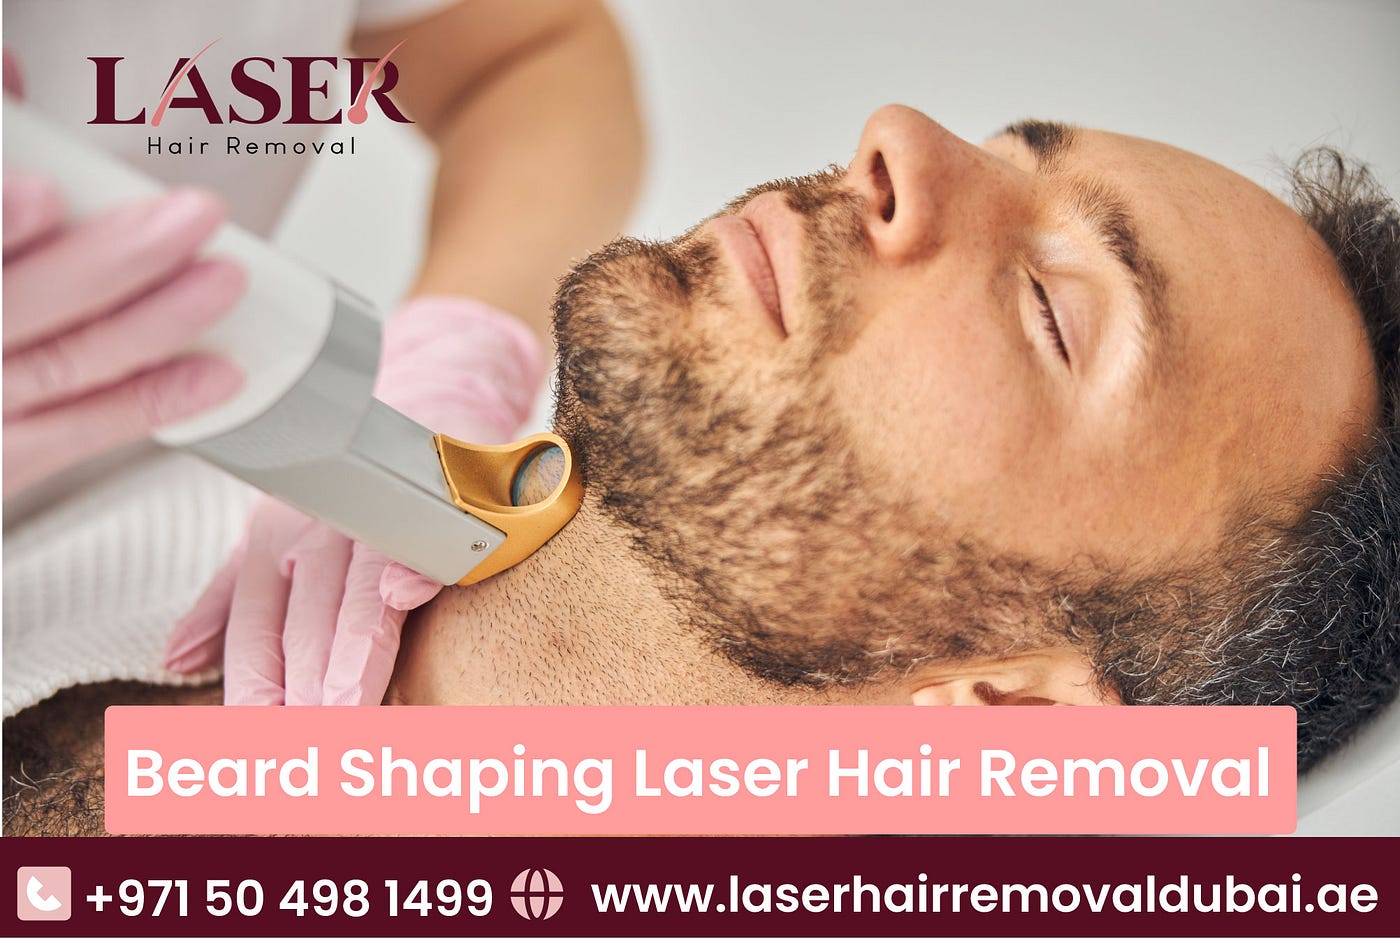 Beard Shaping Laser Hair Removal. Nothing about a man's face defines a… |  by laserhair removal | Medium